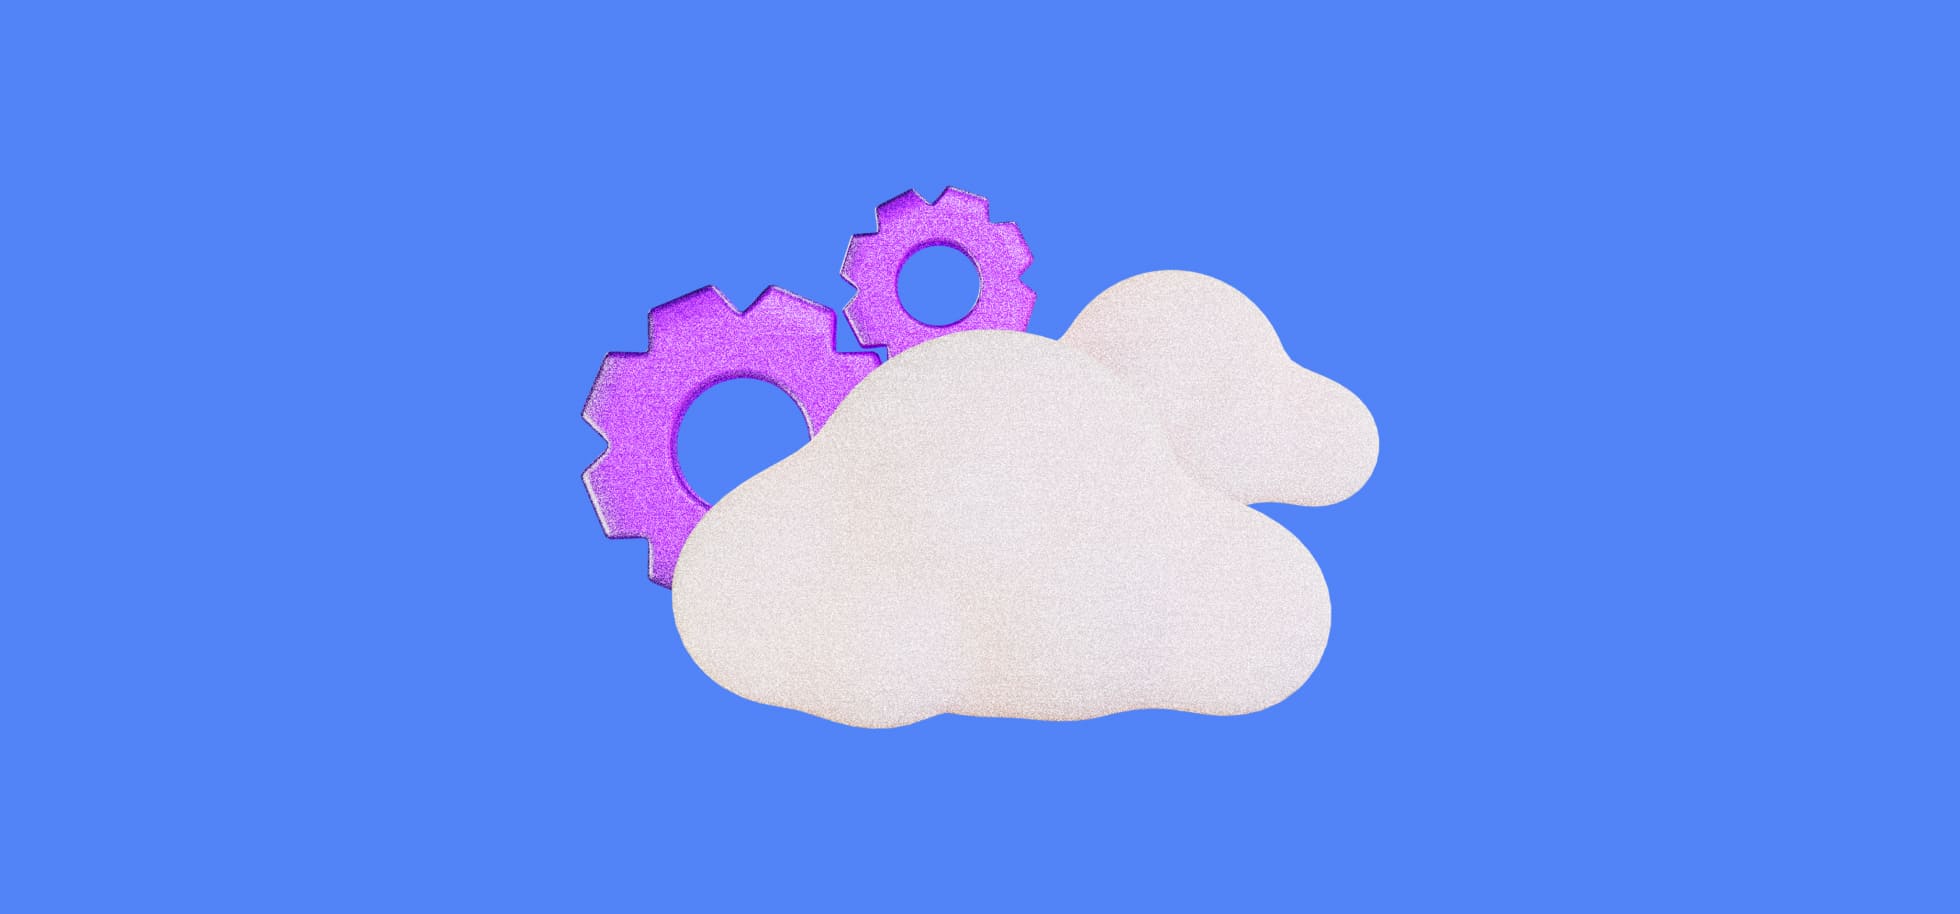 illustration of cloud with gears on the blue background